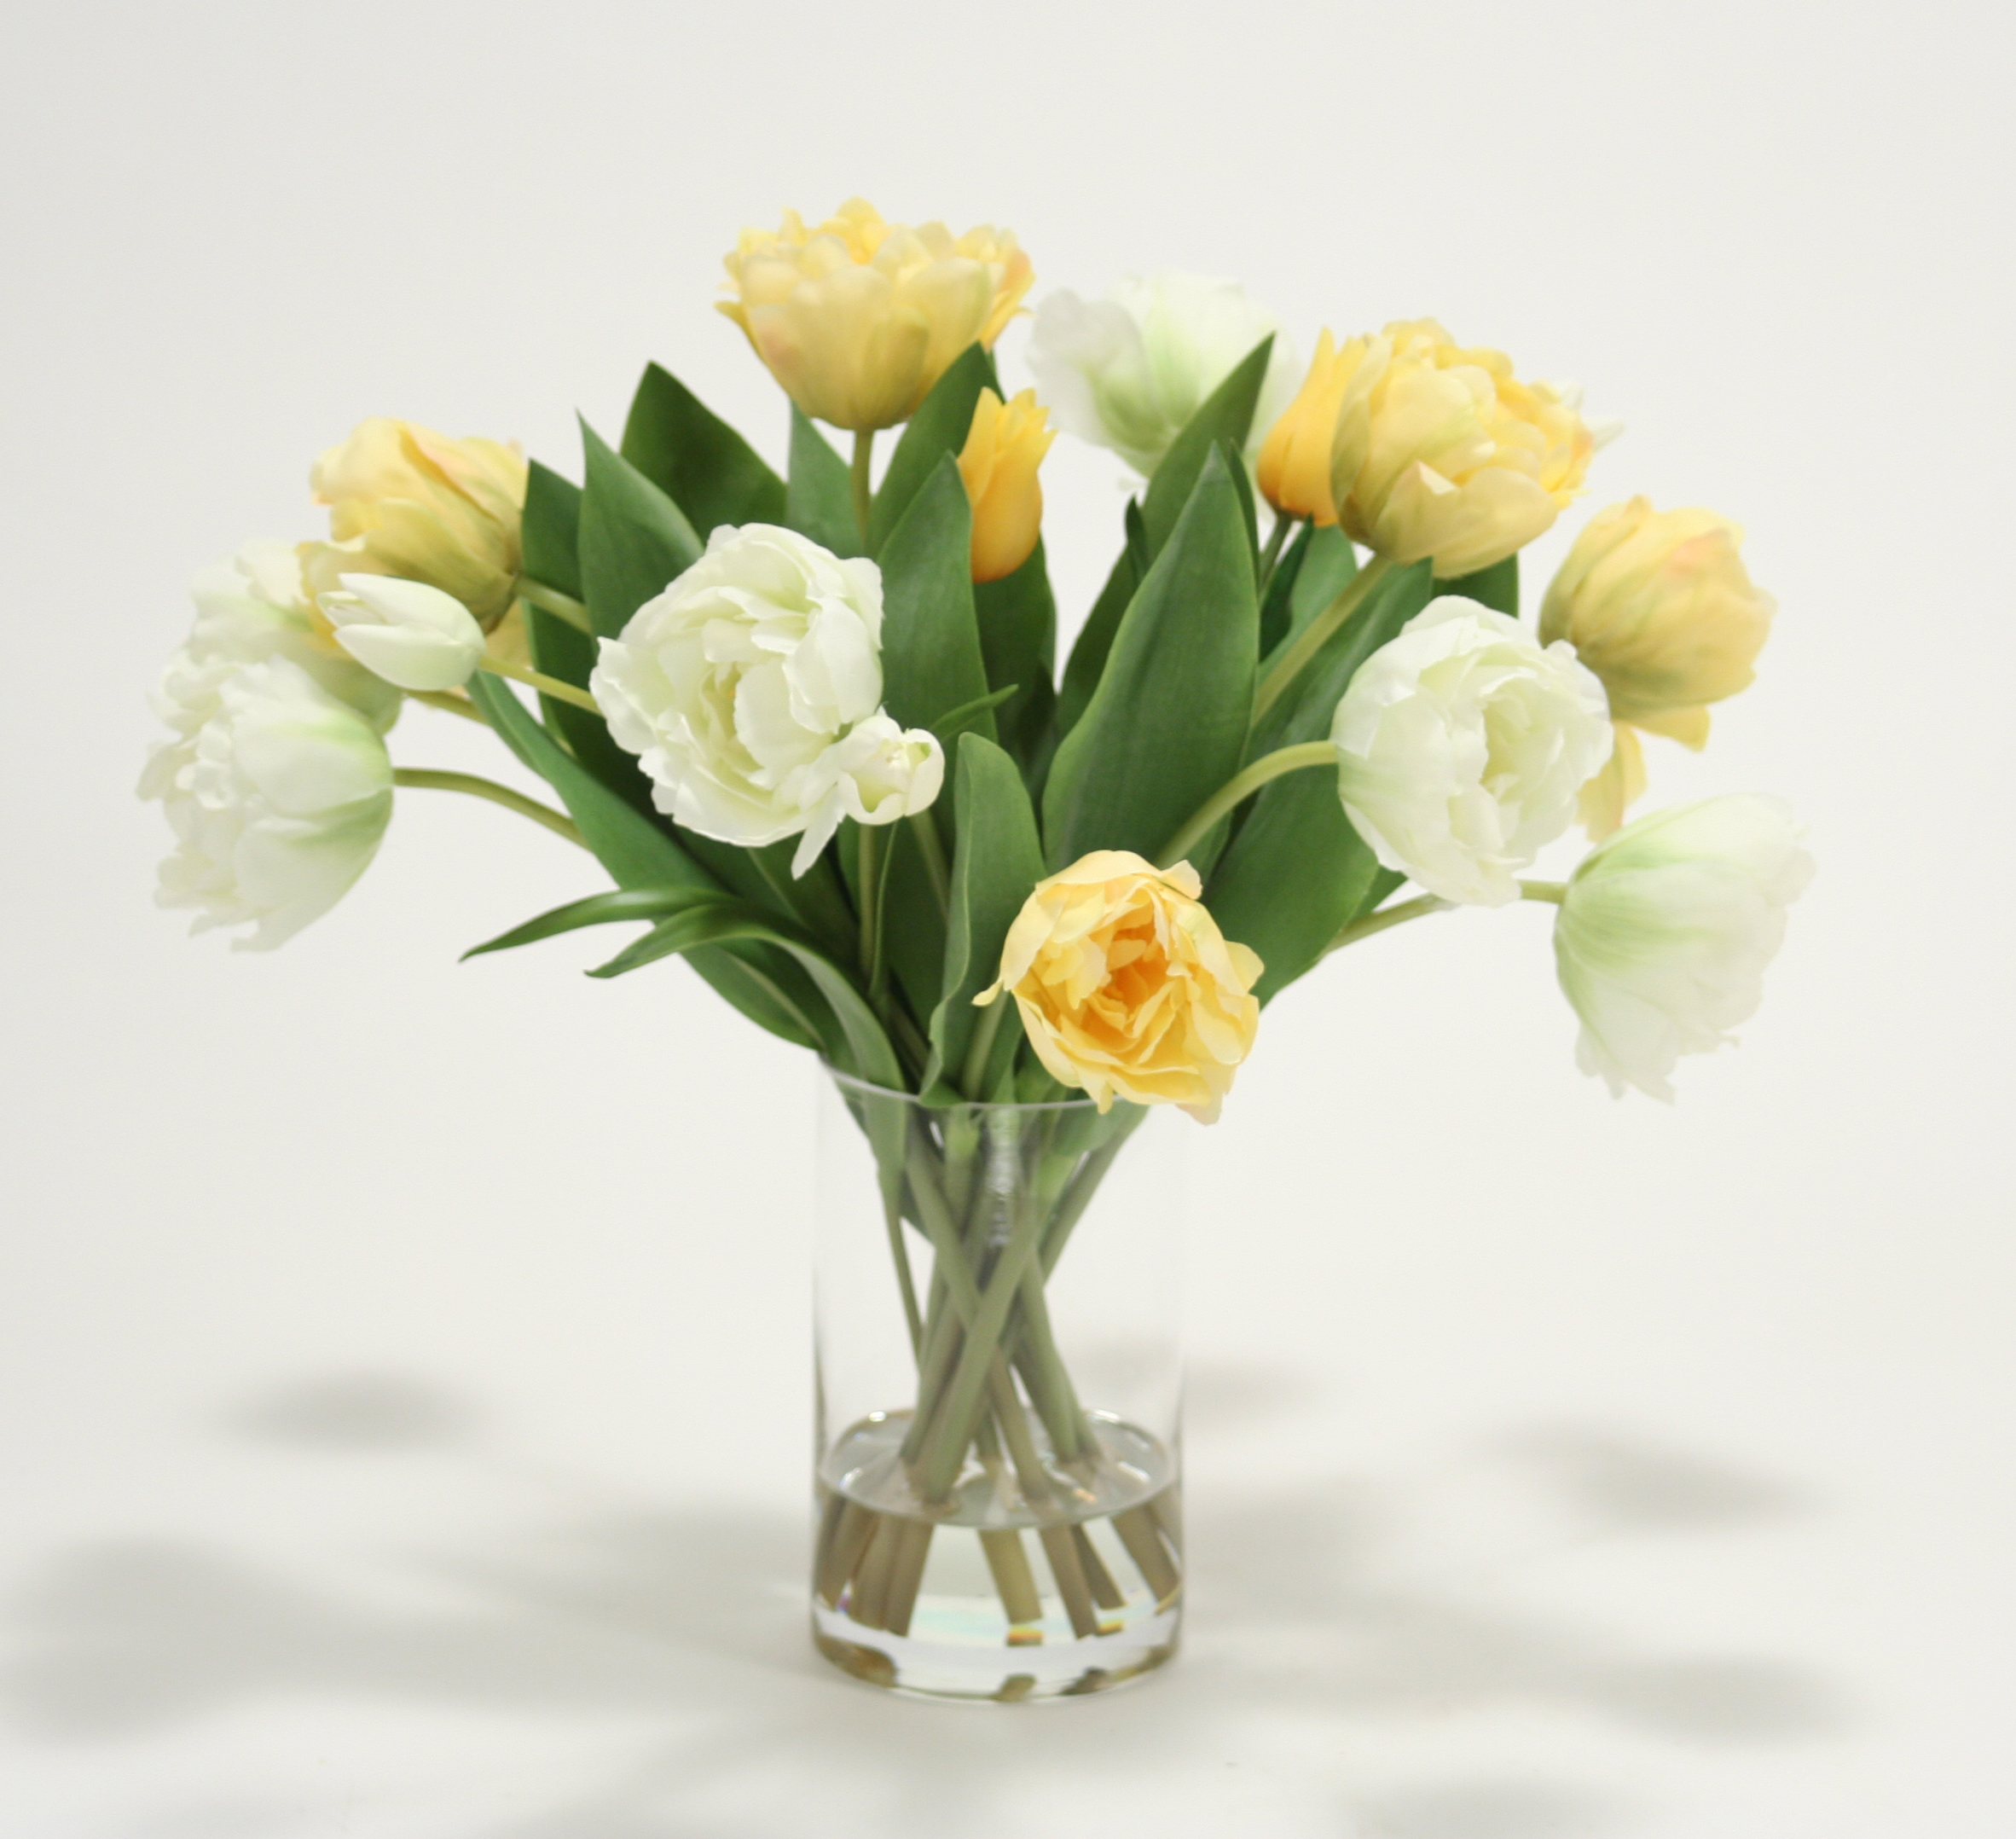 Waterlook ® Mixed Yellow and Cream Green Tulips in Tall Glass Cylinder Vase